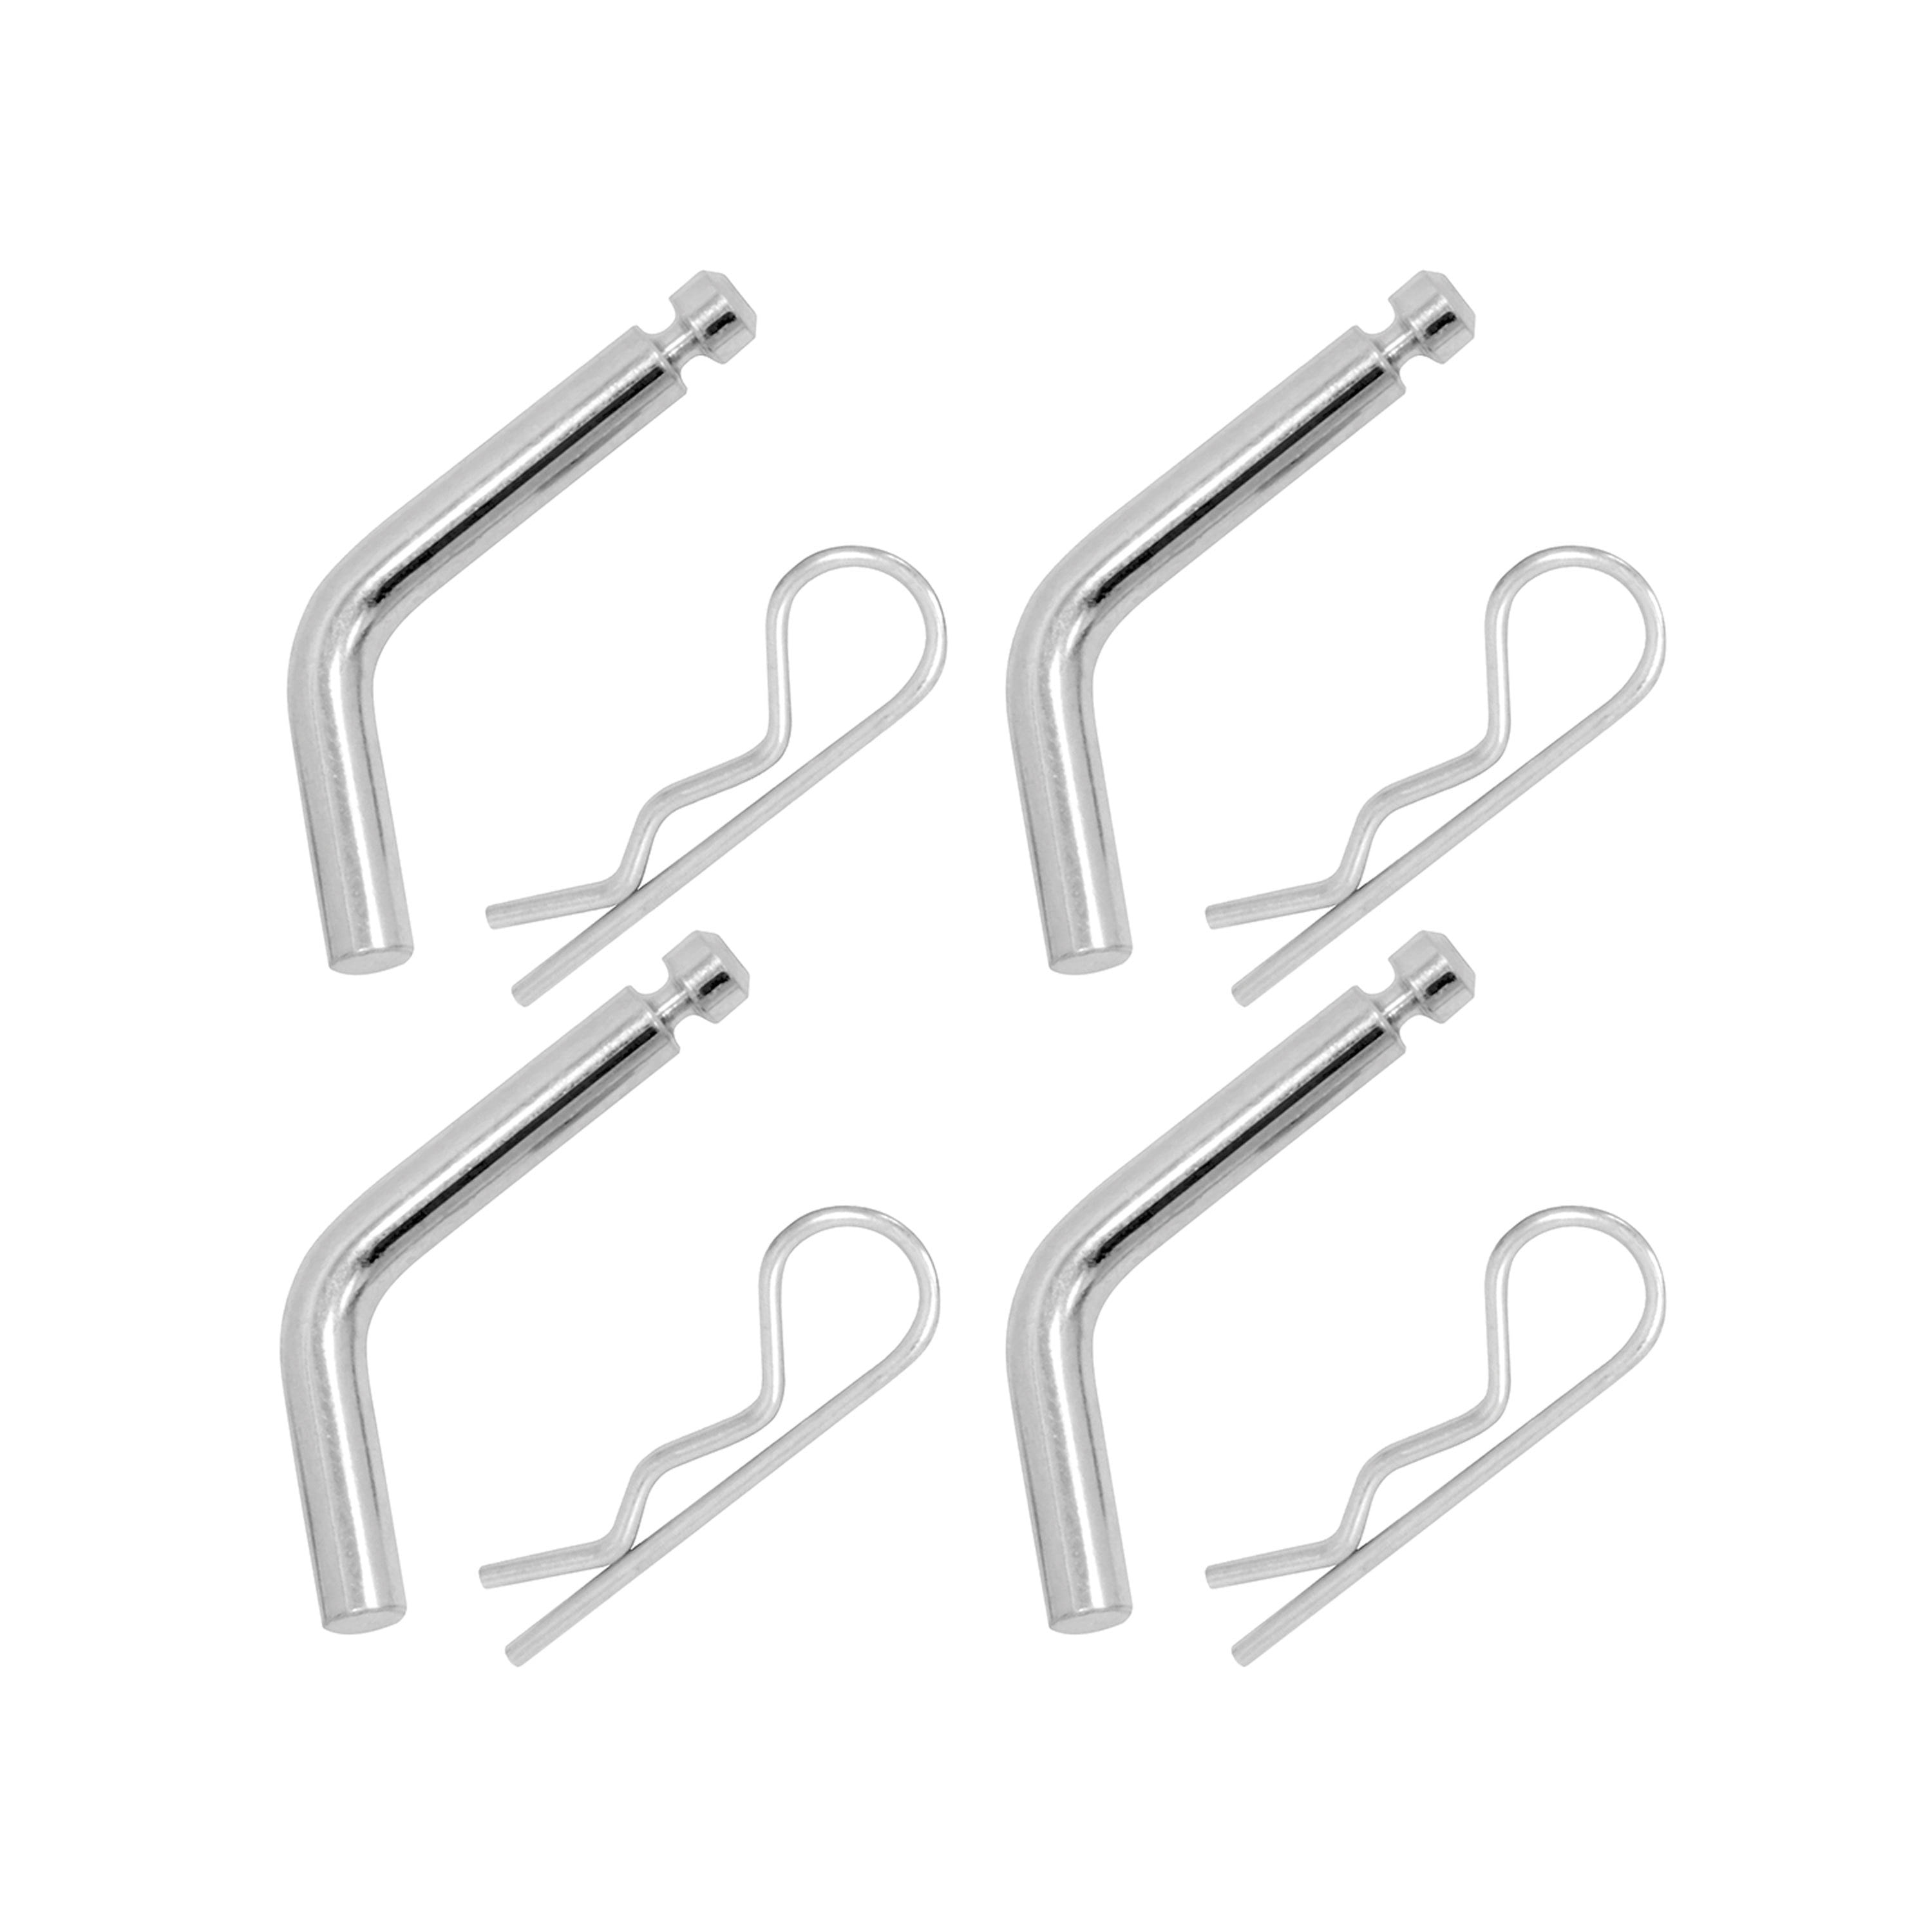 58053 Reese Trailer Hitch Pin Clip Replacement 4 Pins and Clips  For